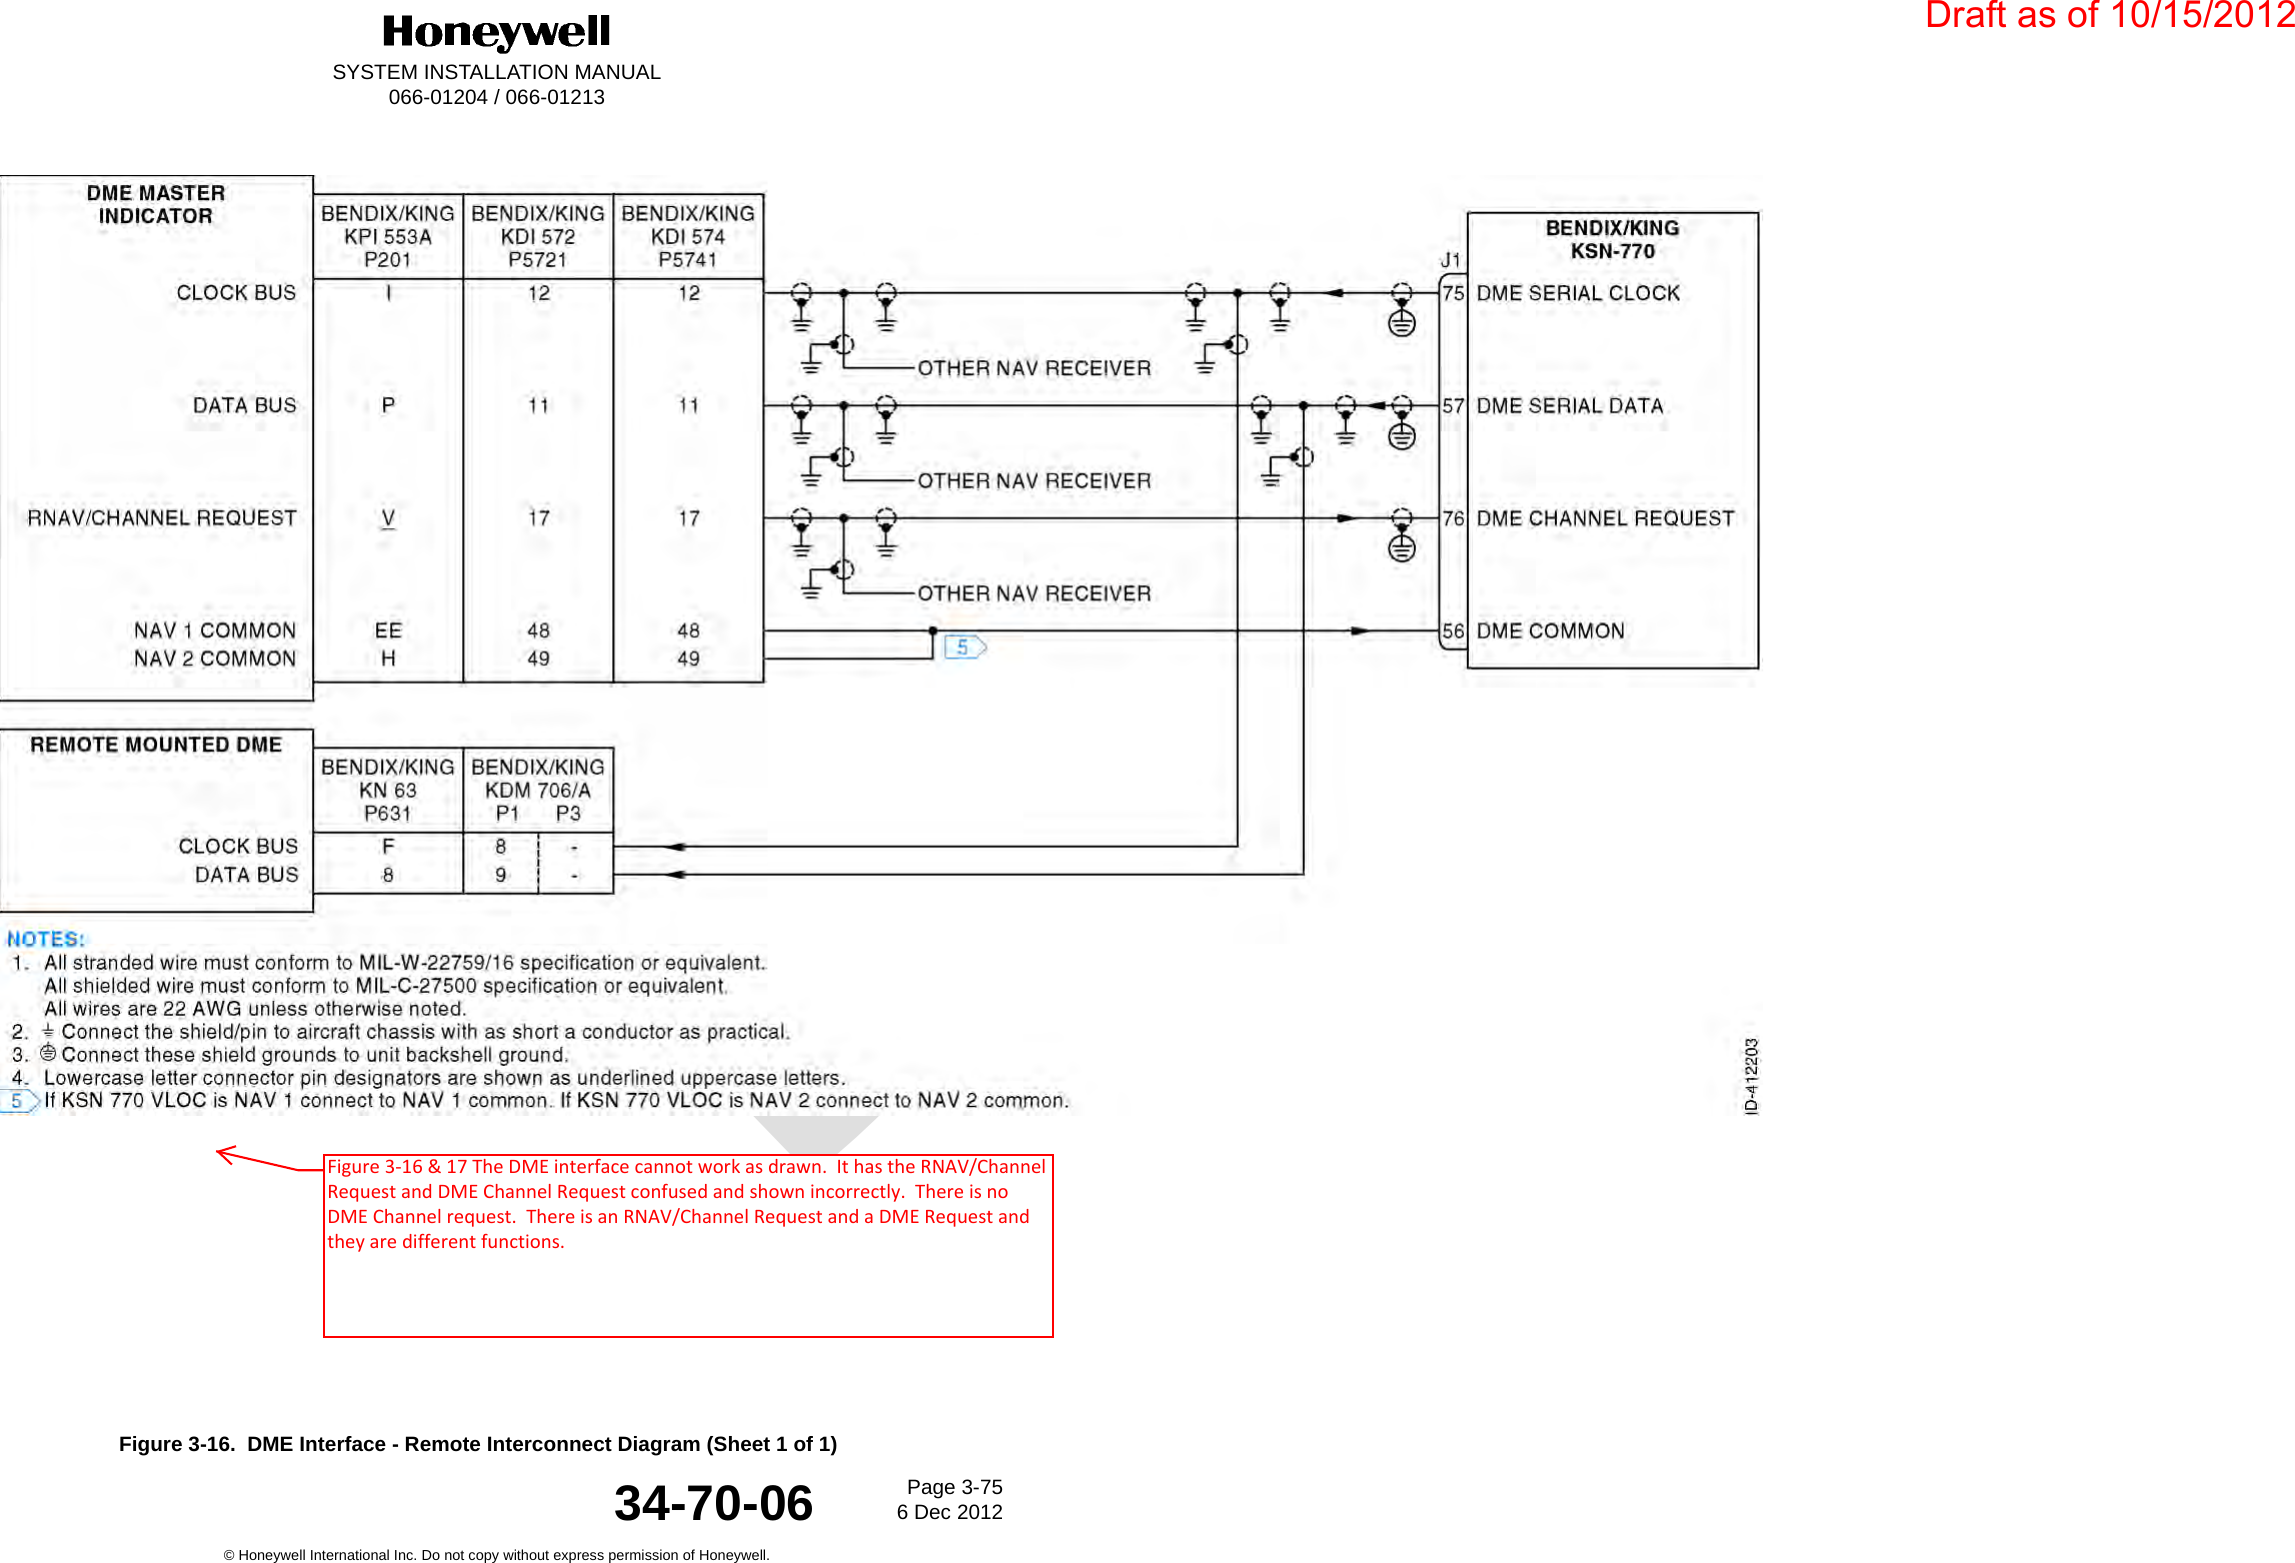 DraftSYSTEM INSTALLATION MANUAL066-01204 / 066-01213Page 3-756 Dec 2012© Honeywell International Inc. Do not copy without express permission of Honeywell.34-70-06Figure 3-16.  DME Interface - Remote Interconnect Diagram (Sheet 1 of 1)Draft as of 10/15/2012Figure 3-16 &amp; 17 The DME interface cannot work as drawn.  It has the RNAV/Channel Request and DME Channel Request confused and shown incorrectly.  There is no DME Channel request.  There is an RNAV/Channel Request and a DME Request and they are different functions. 